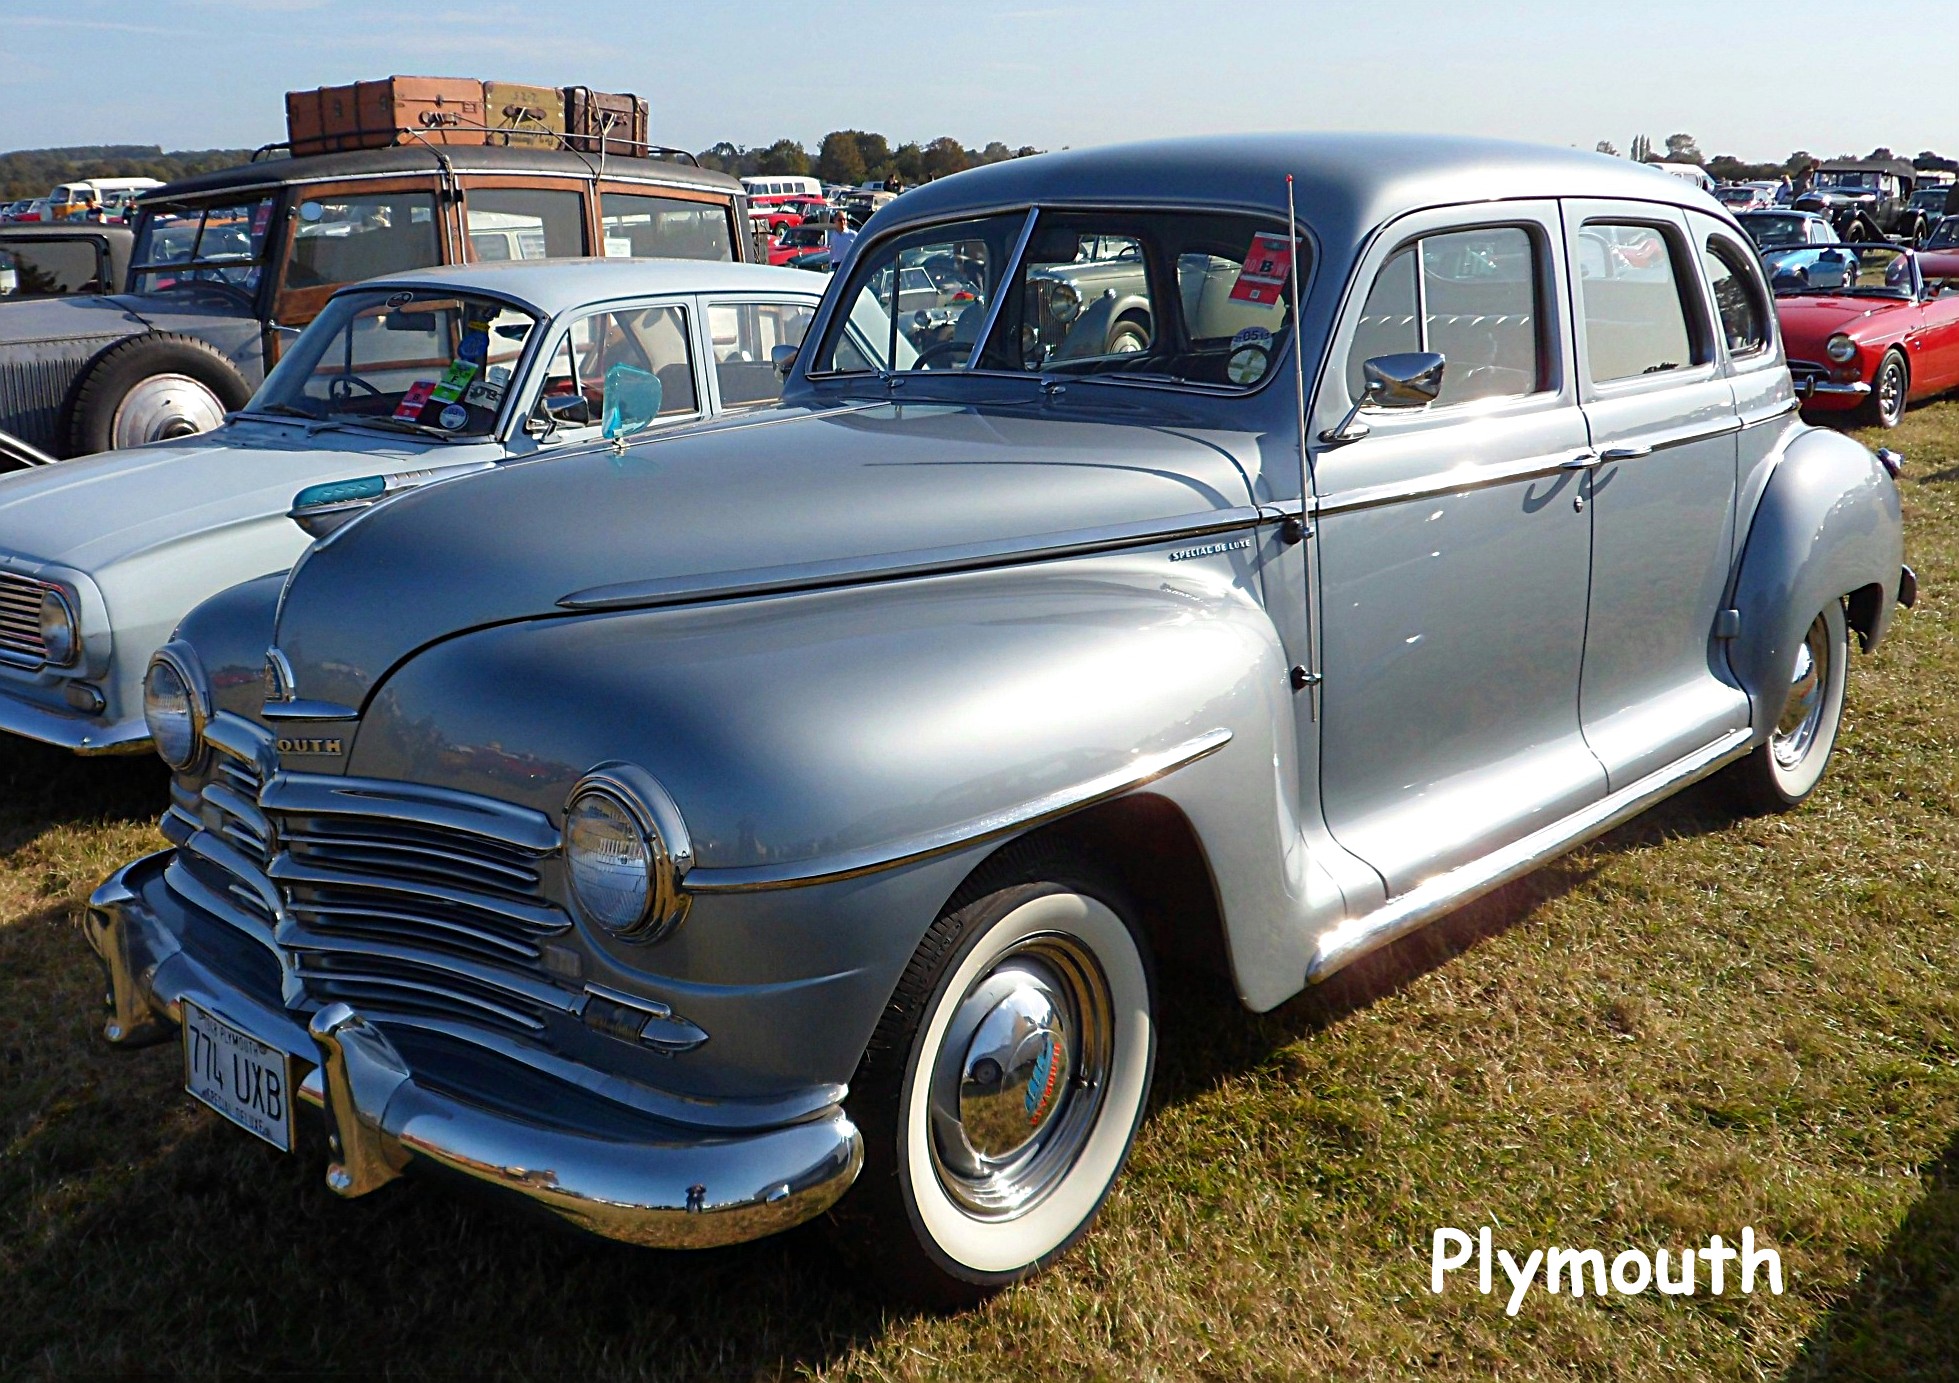 PLYMOUTH 02